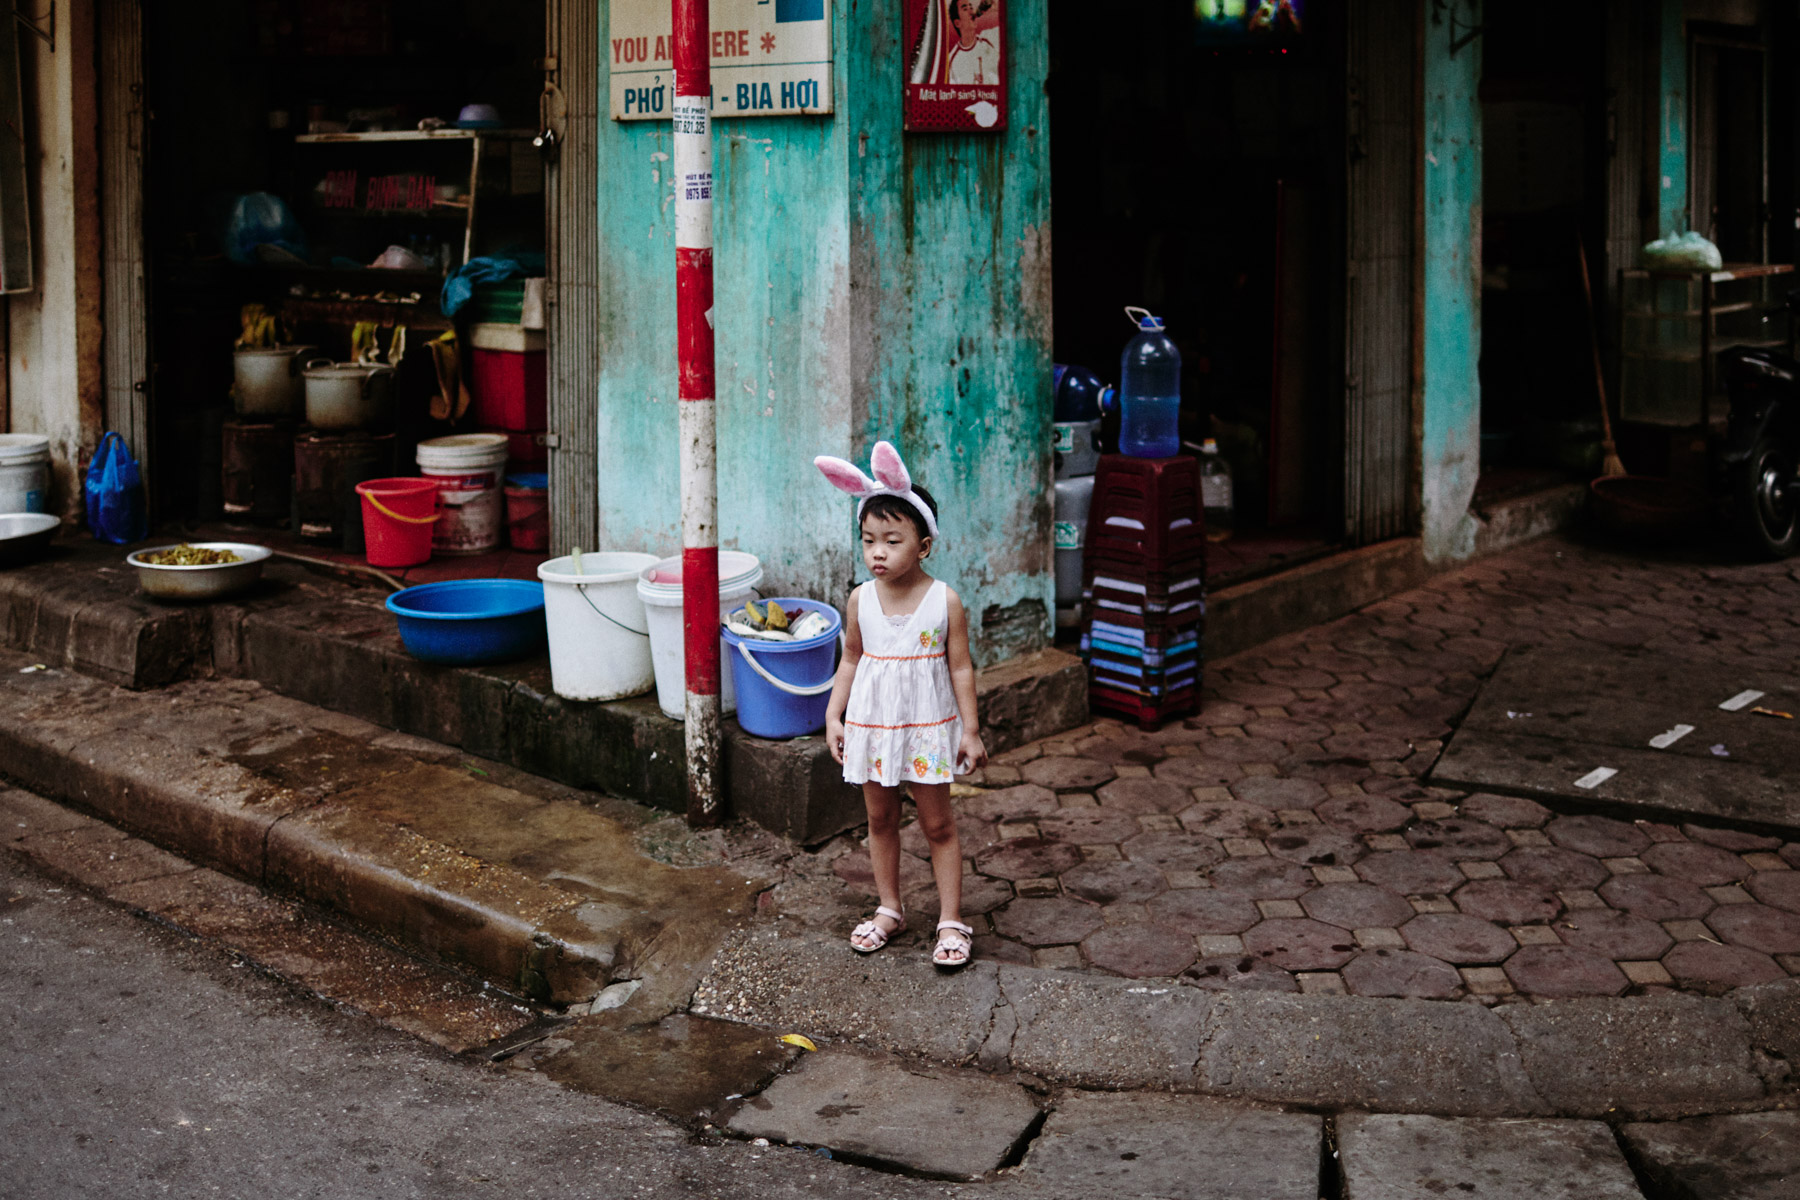 A young girl in bunny ears in the Old Quarter.